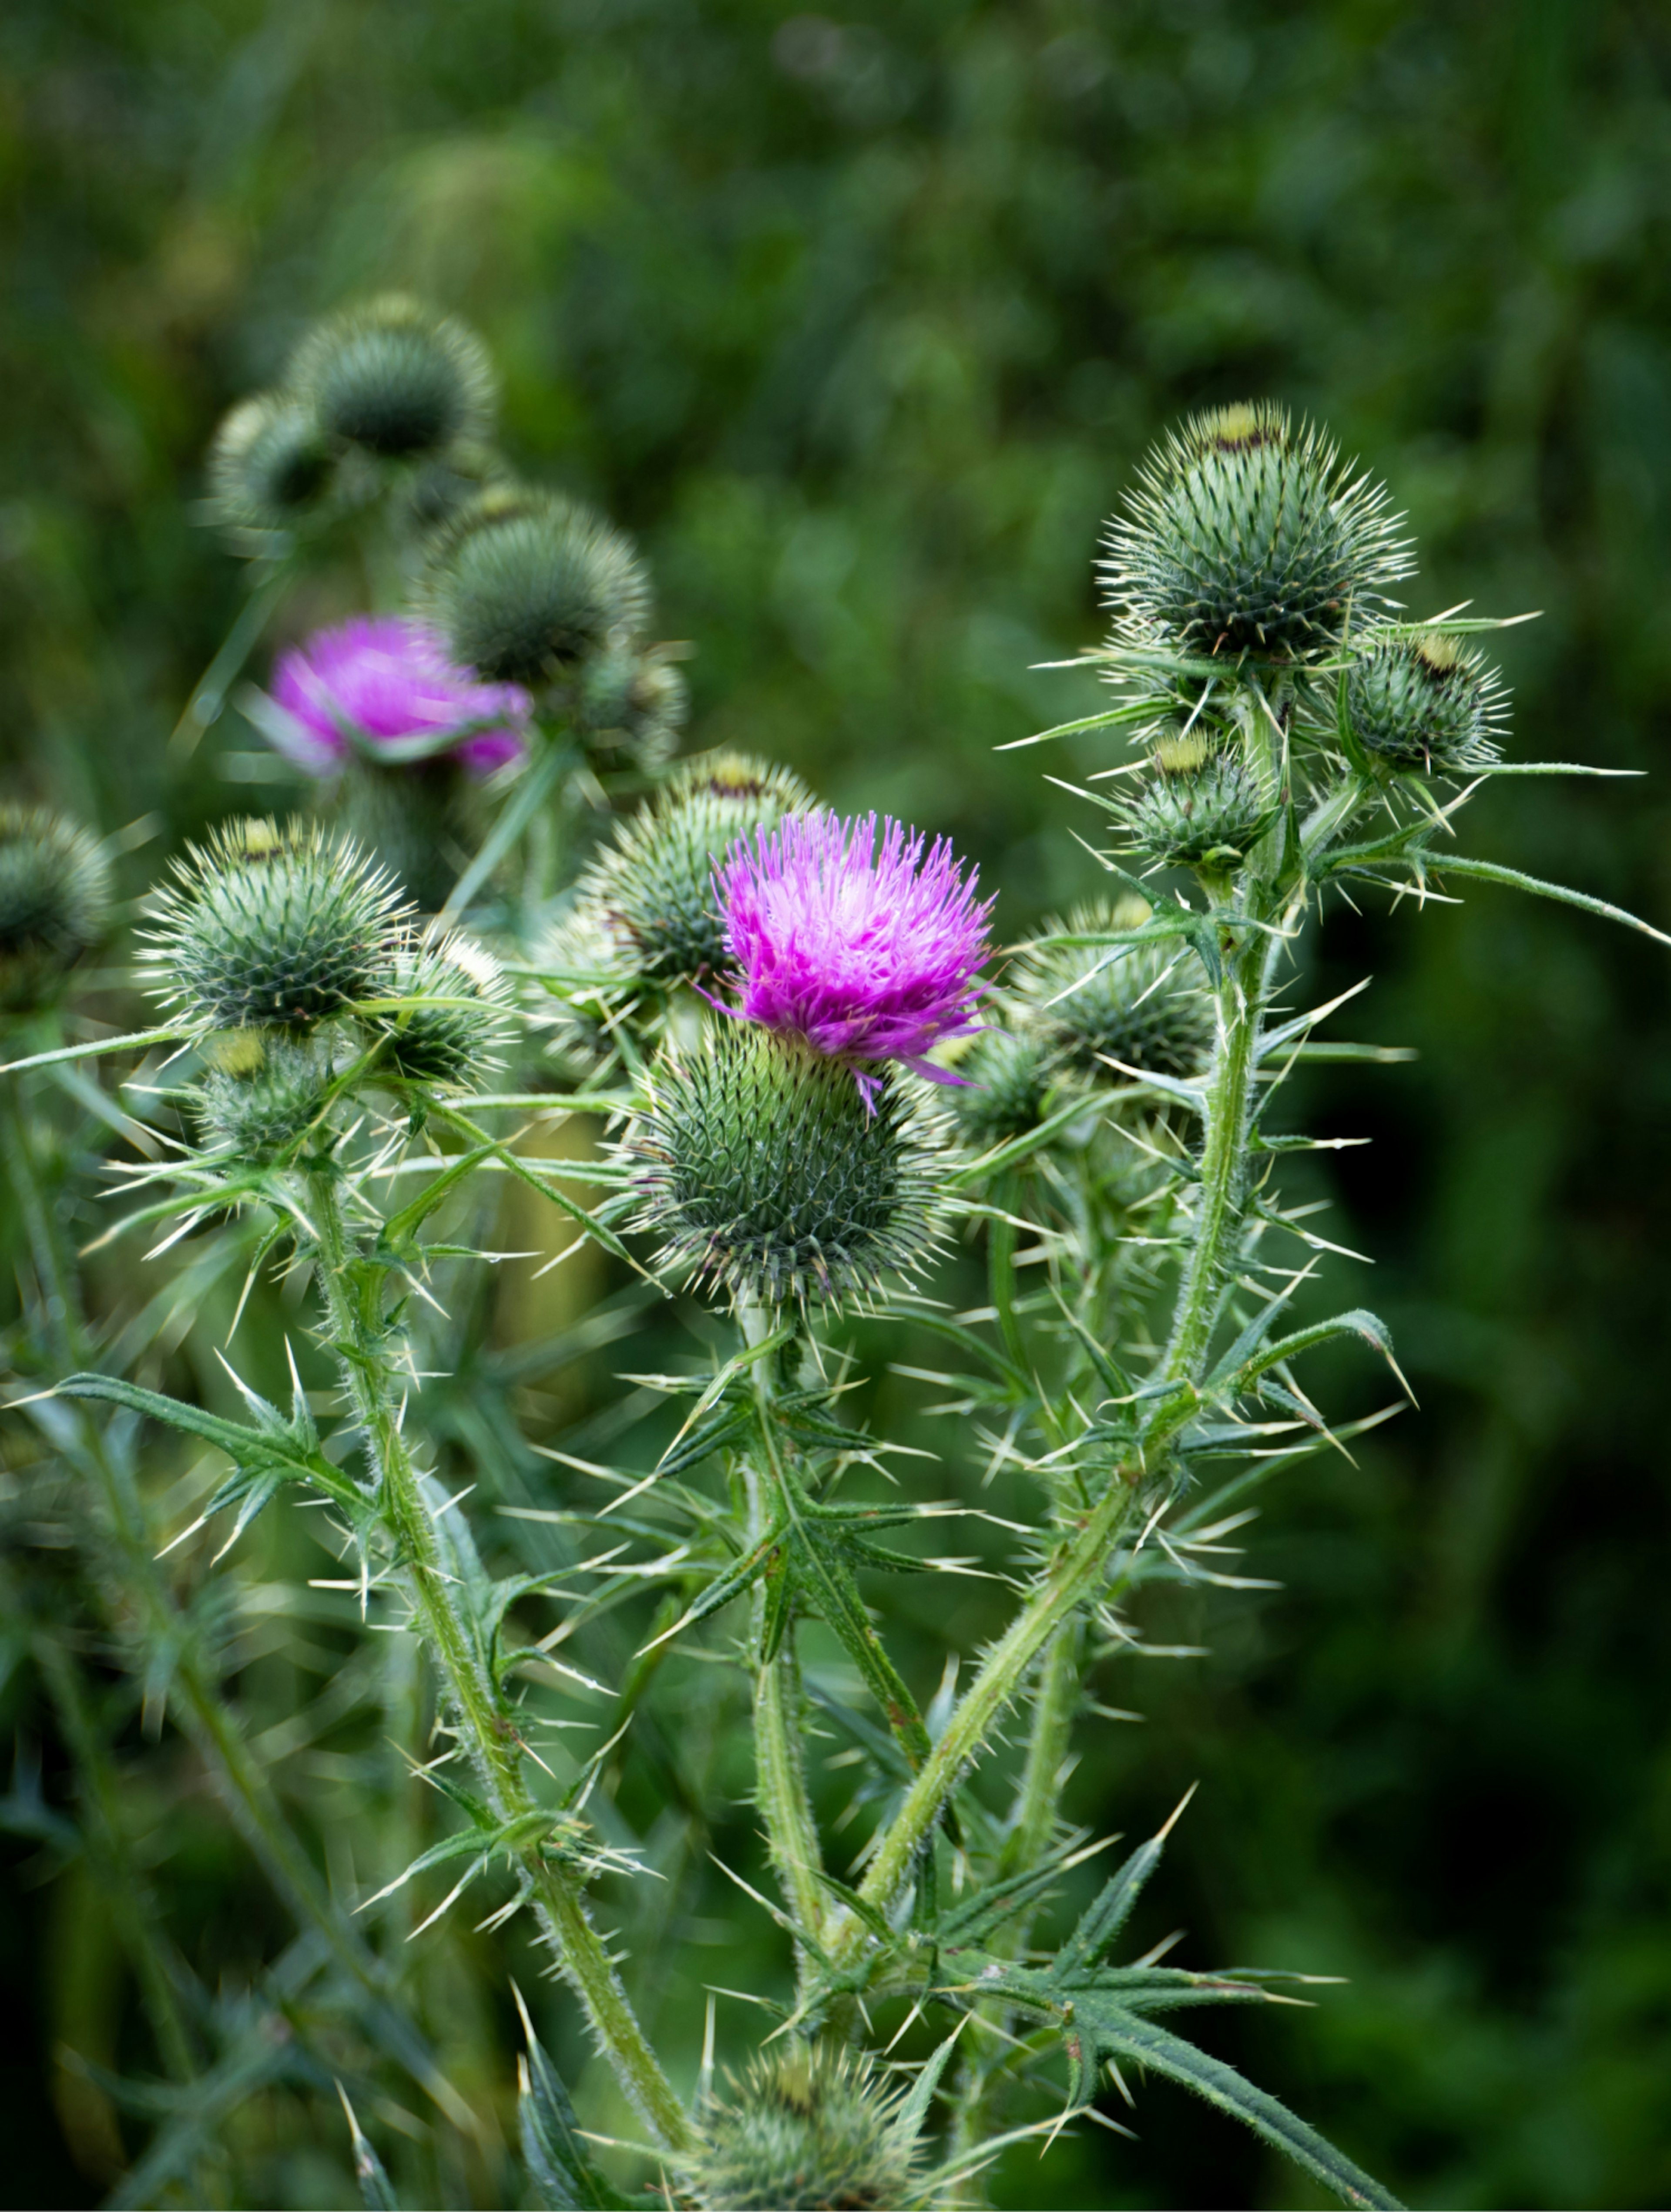 Thistles in field.